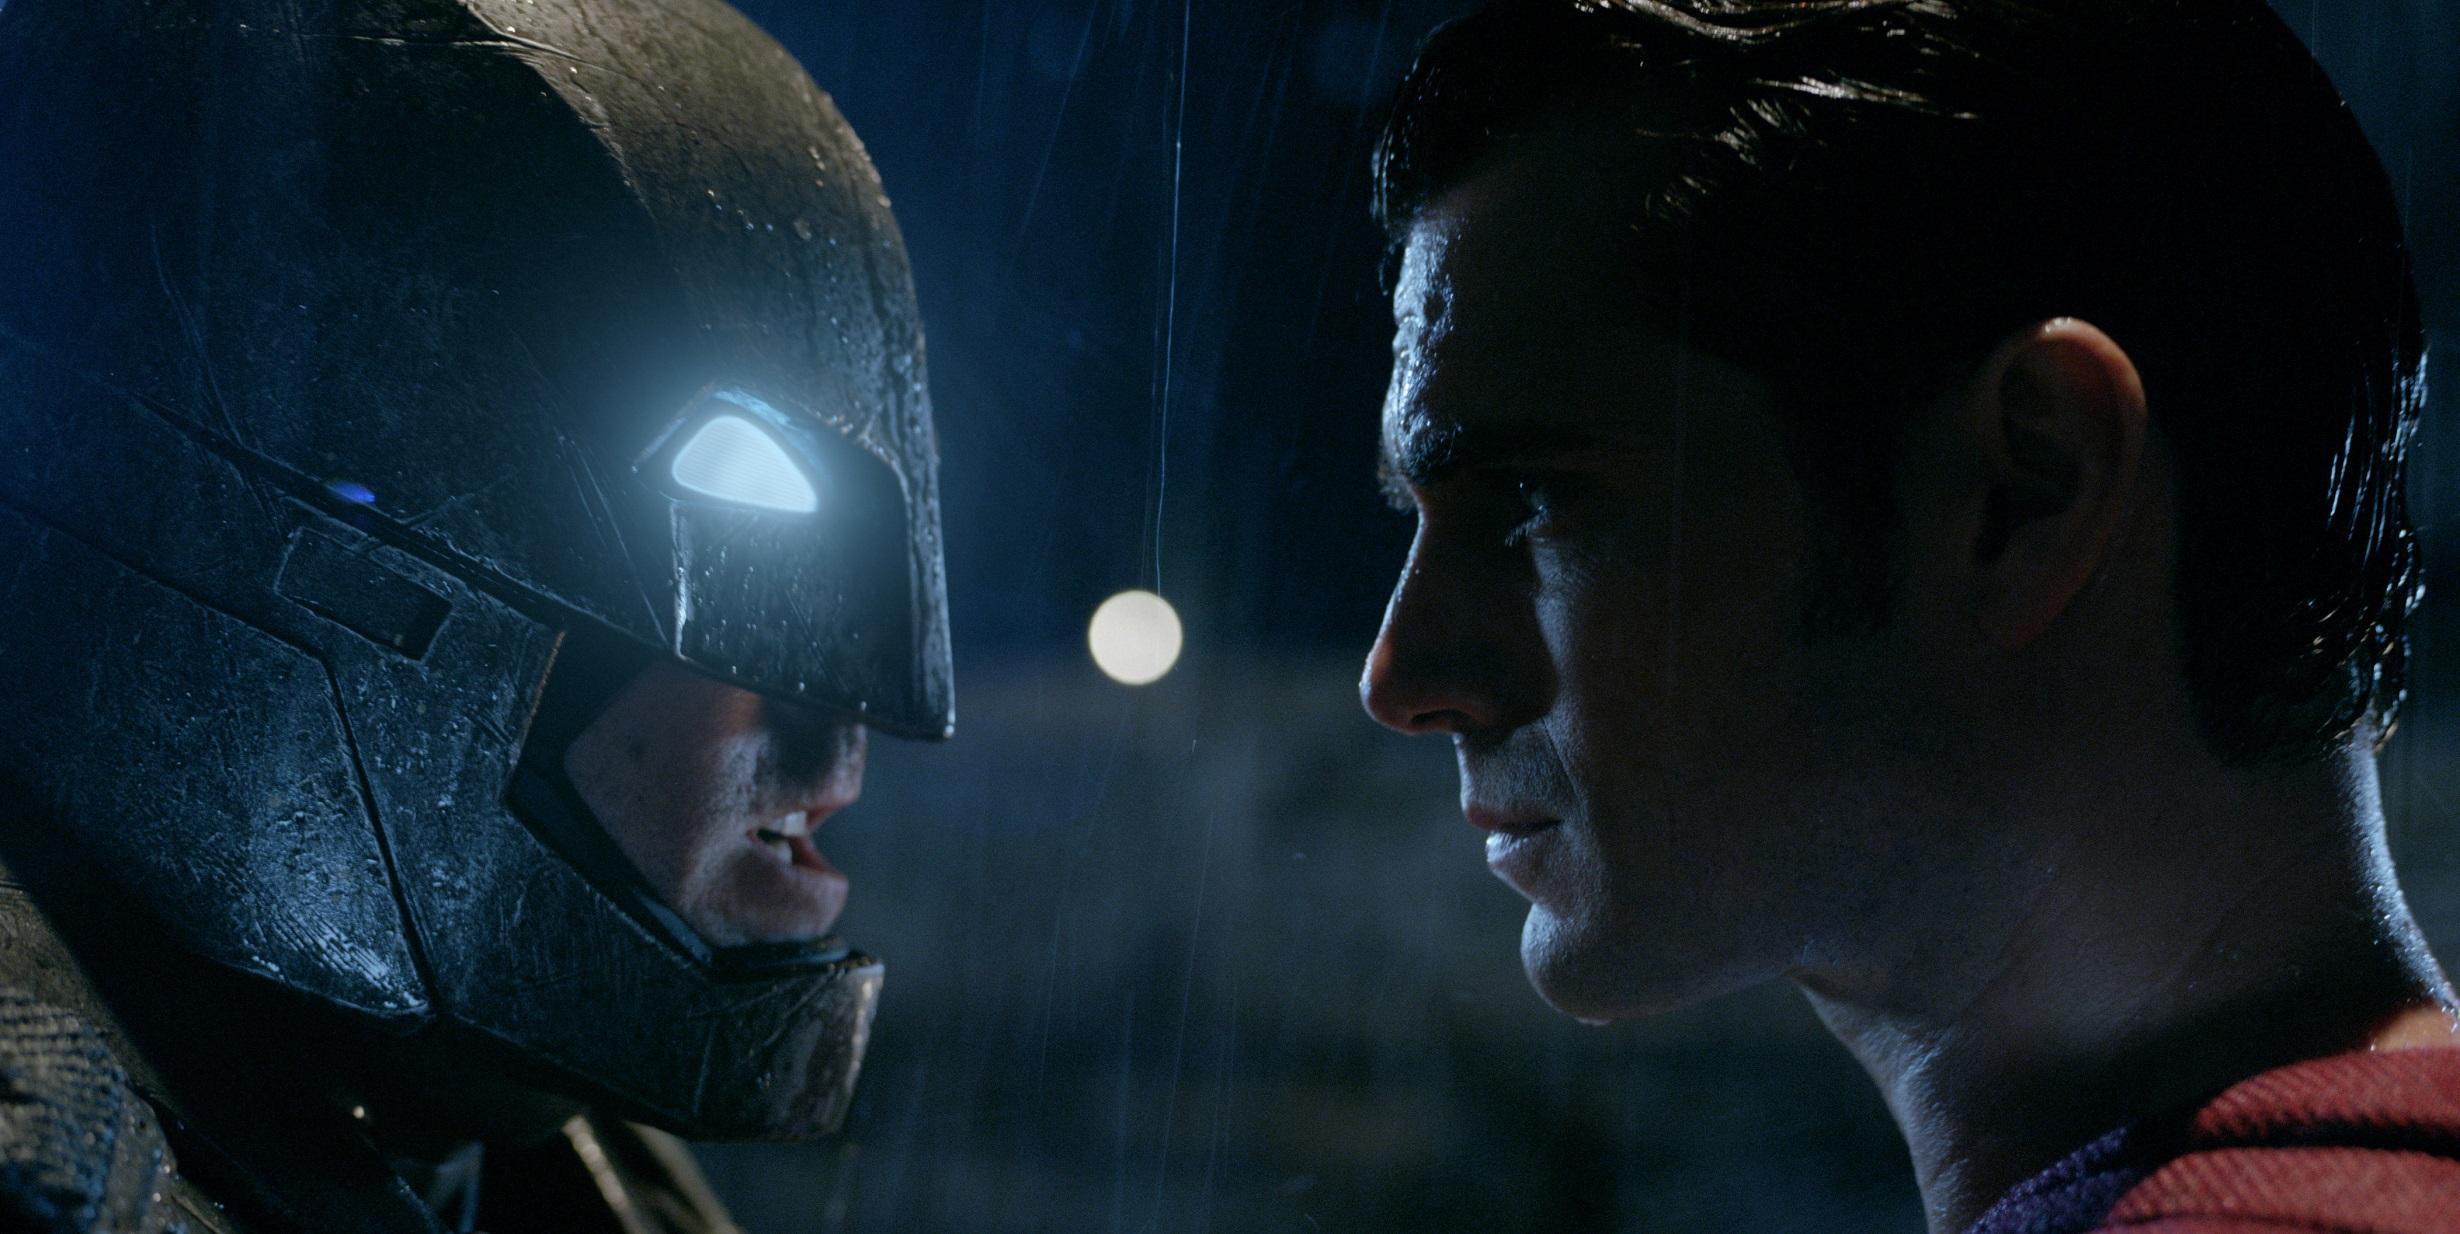 New Batman movie lands strong Rotten Tomatoes rating